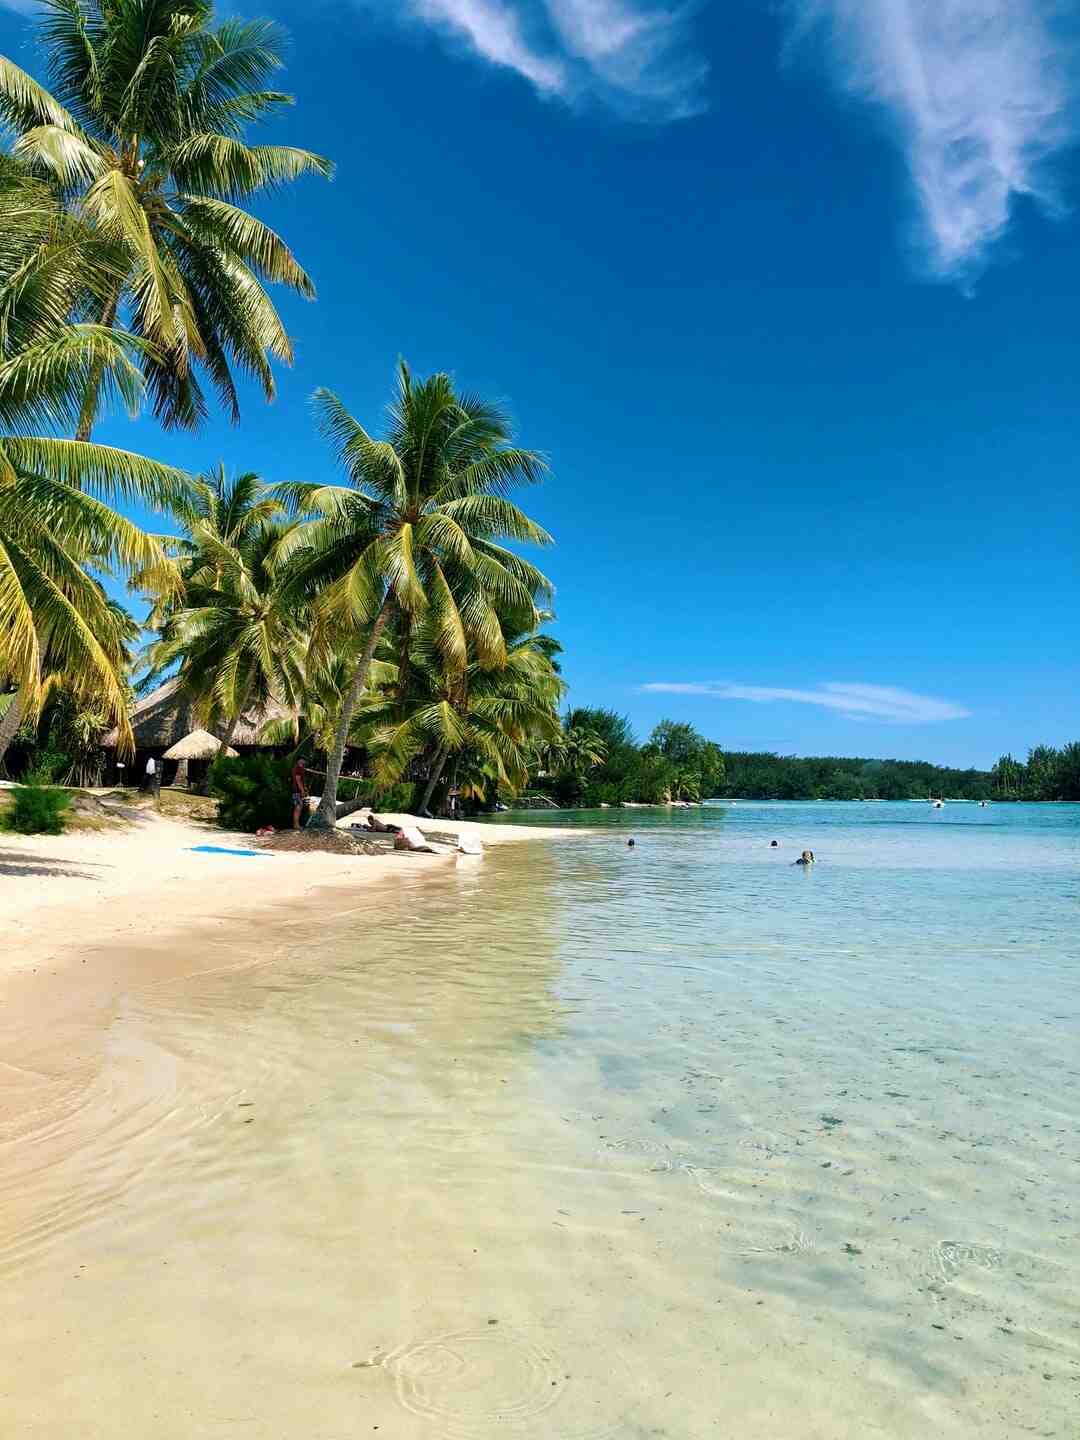 How to get to Tahiti from France?